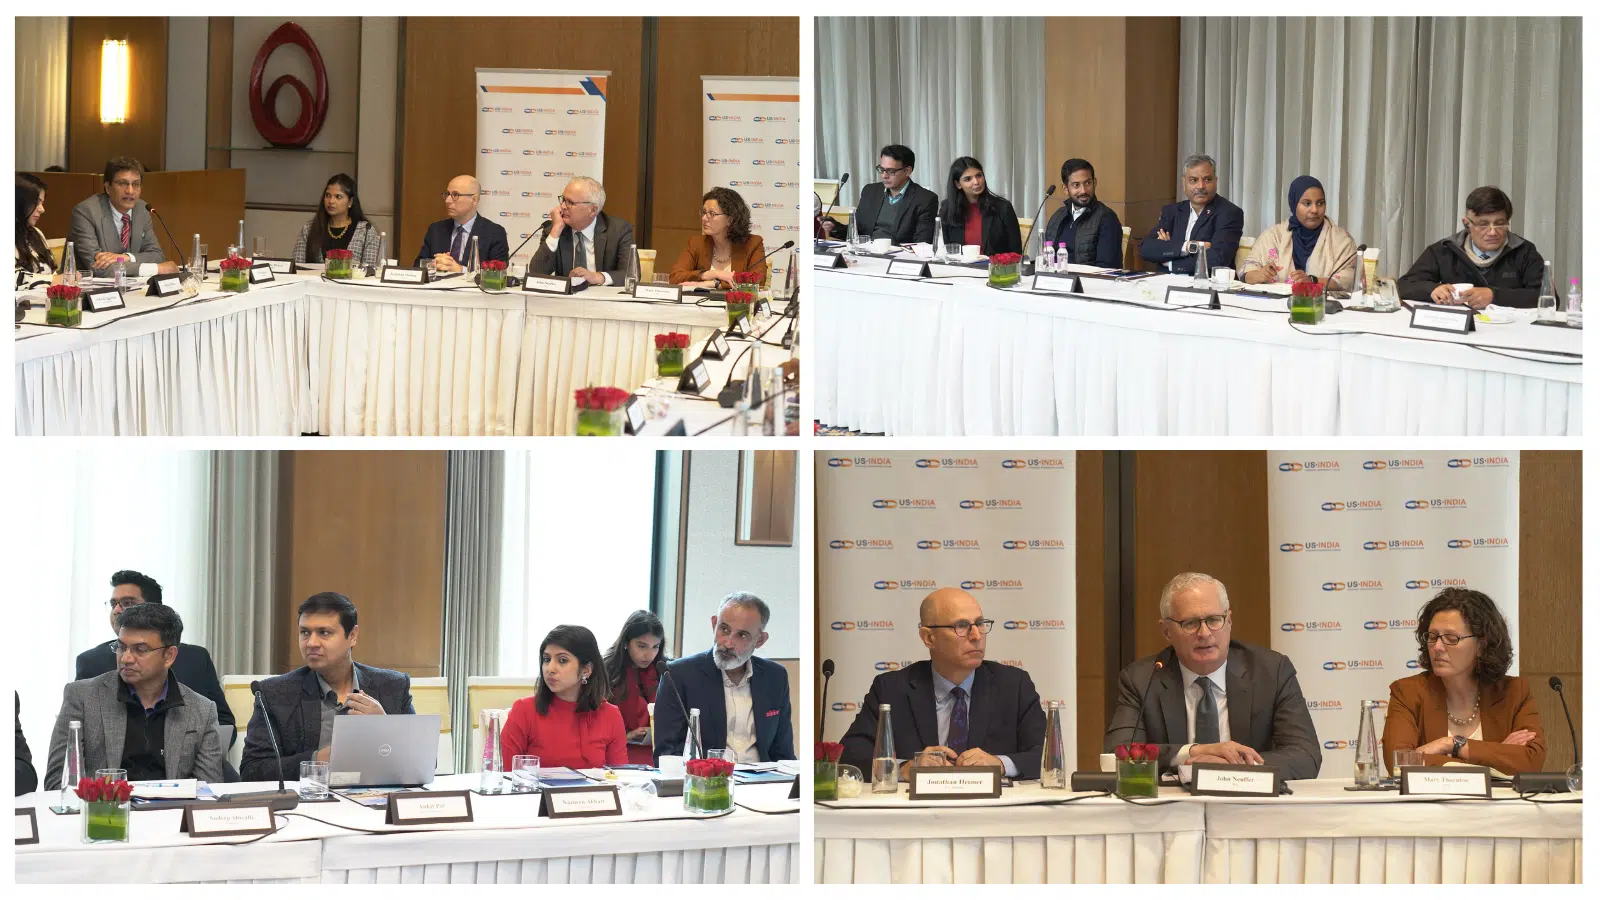 USISPF was honored to host the visiting delegation from the Semiconductor Industry Association (SIA) in New Delhi for a roundtable discussion with our members